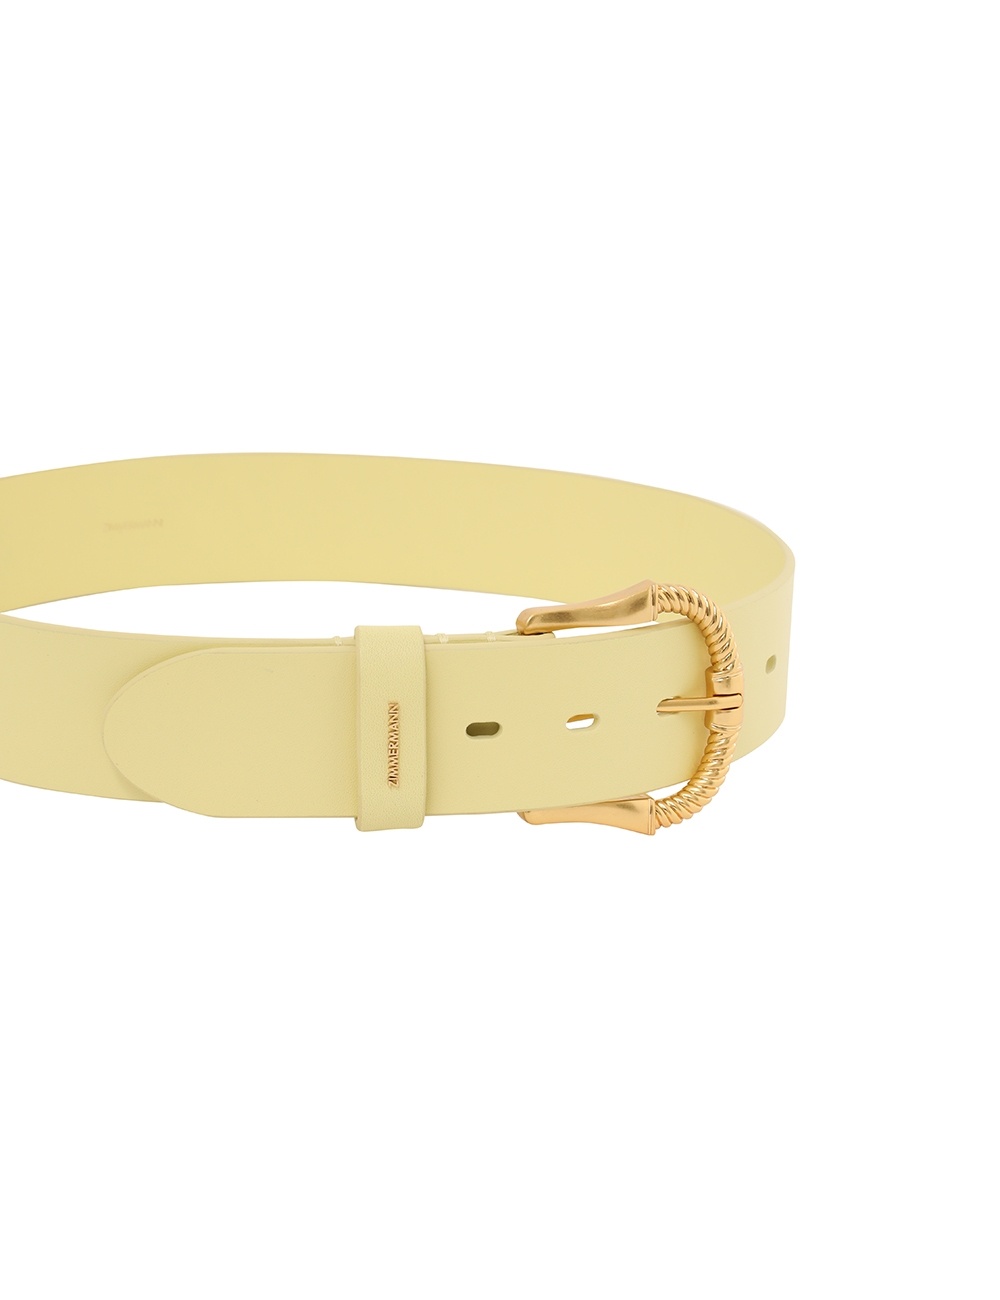 TWISTED BUCKLE LEATHER BELT 40 - 4